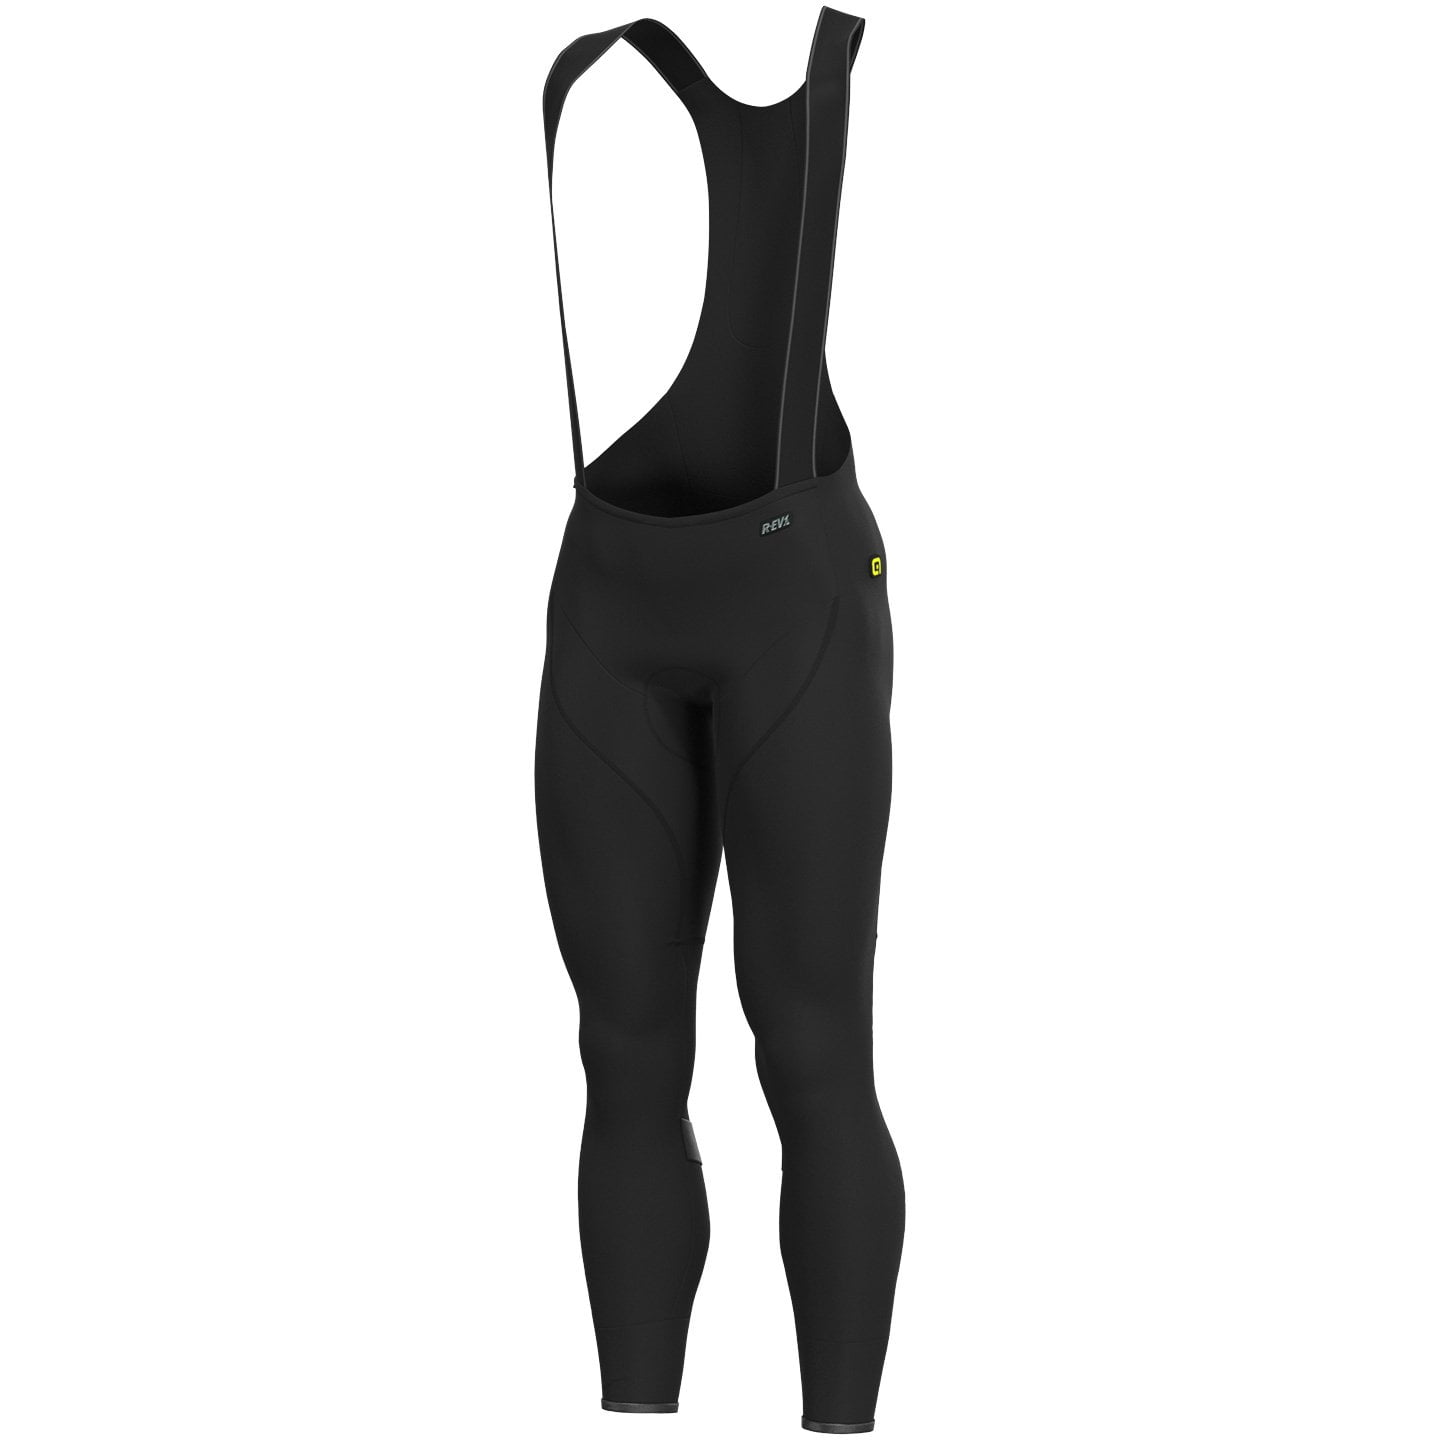 ALE Clima Warm Plus Bib Tights Bib Tights, for men, size 3XL, Cycle trousers, Cycle gear